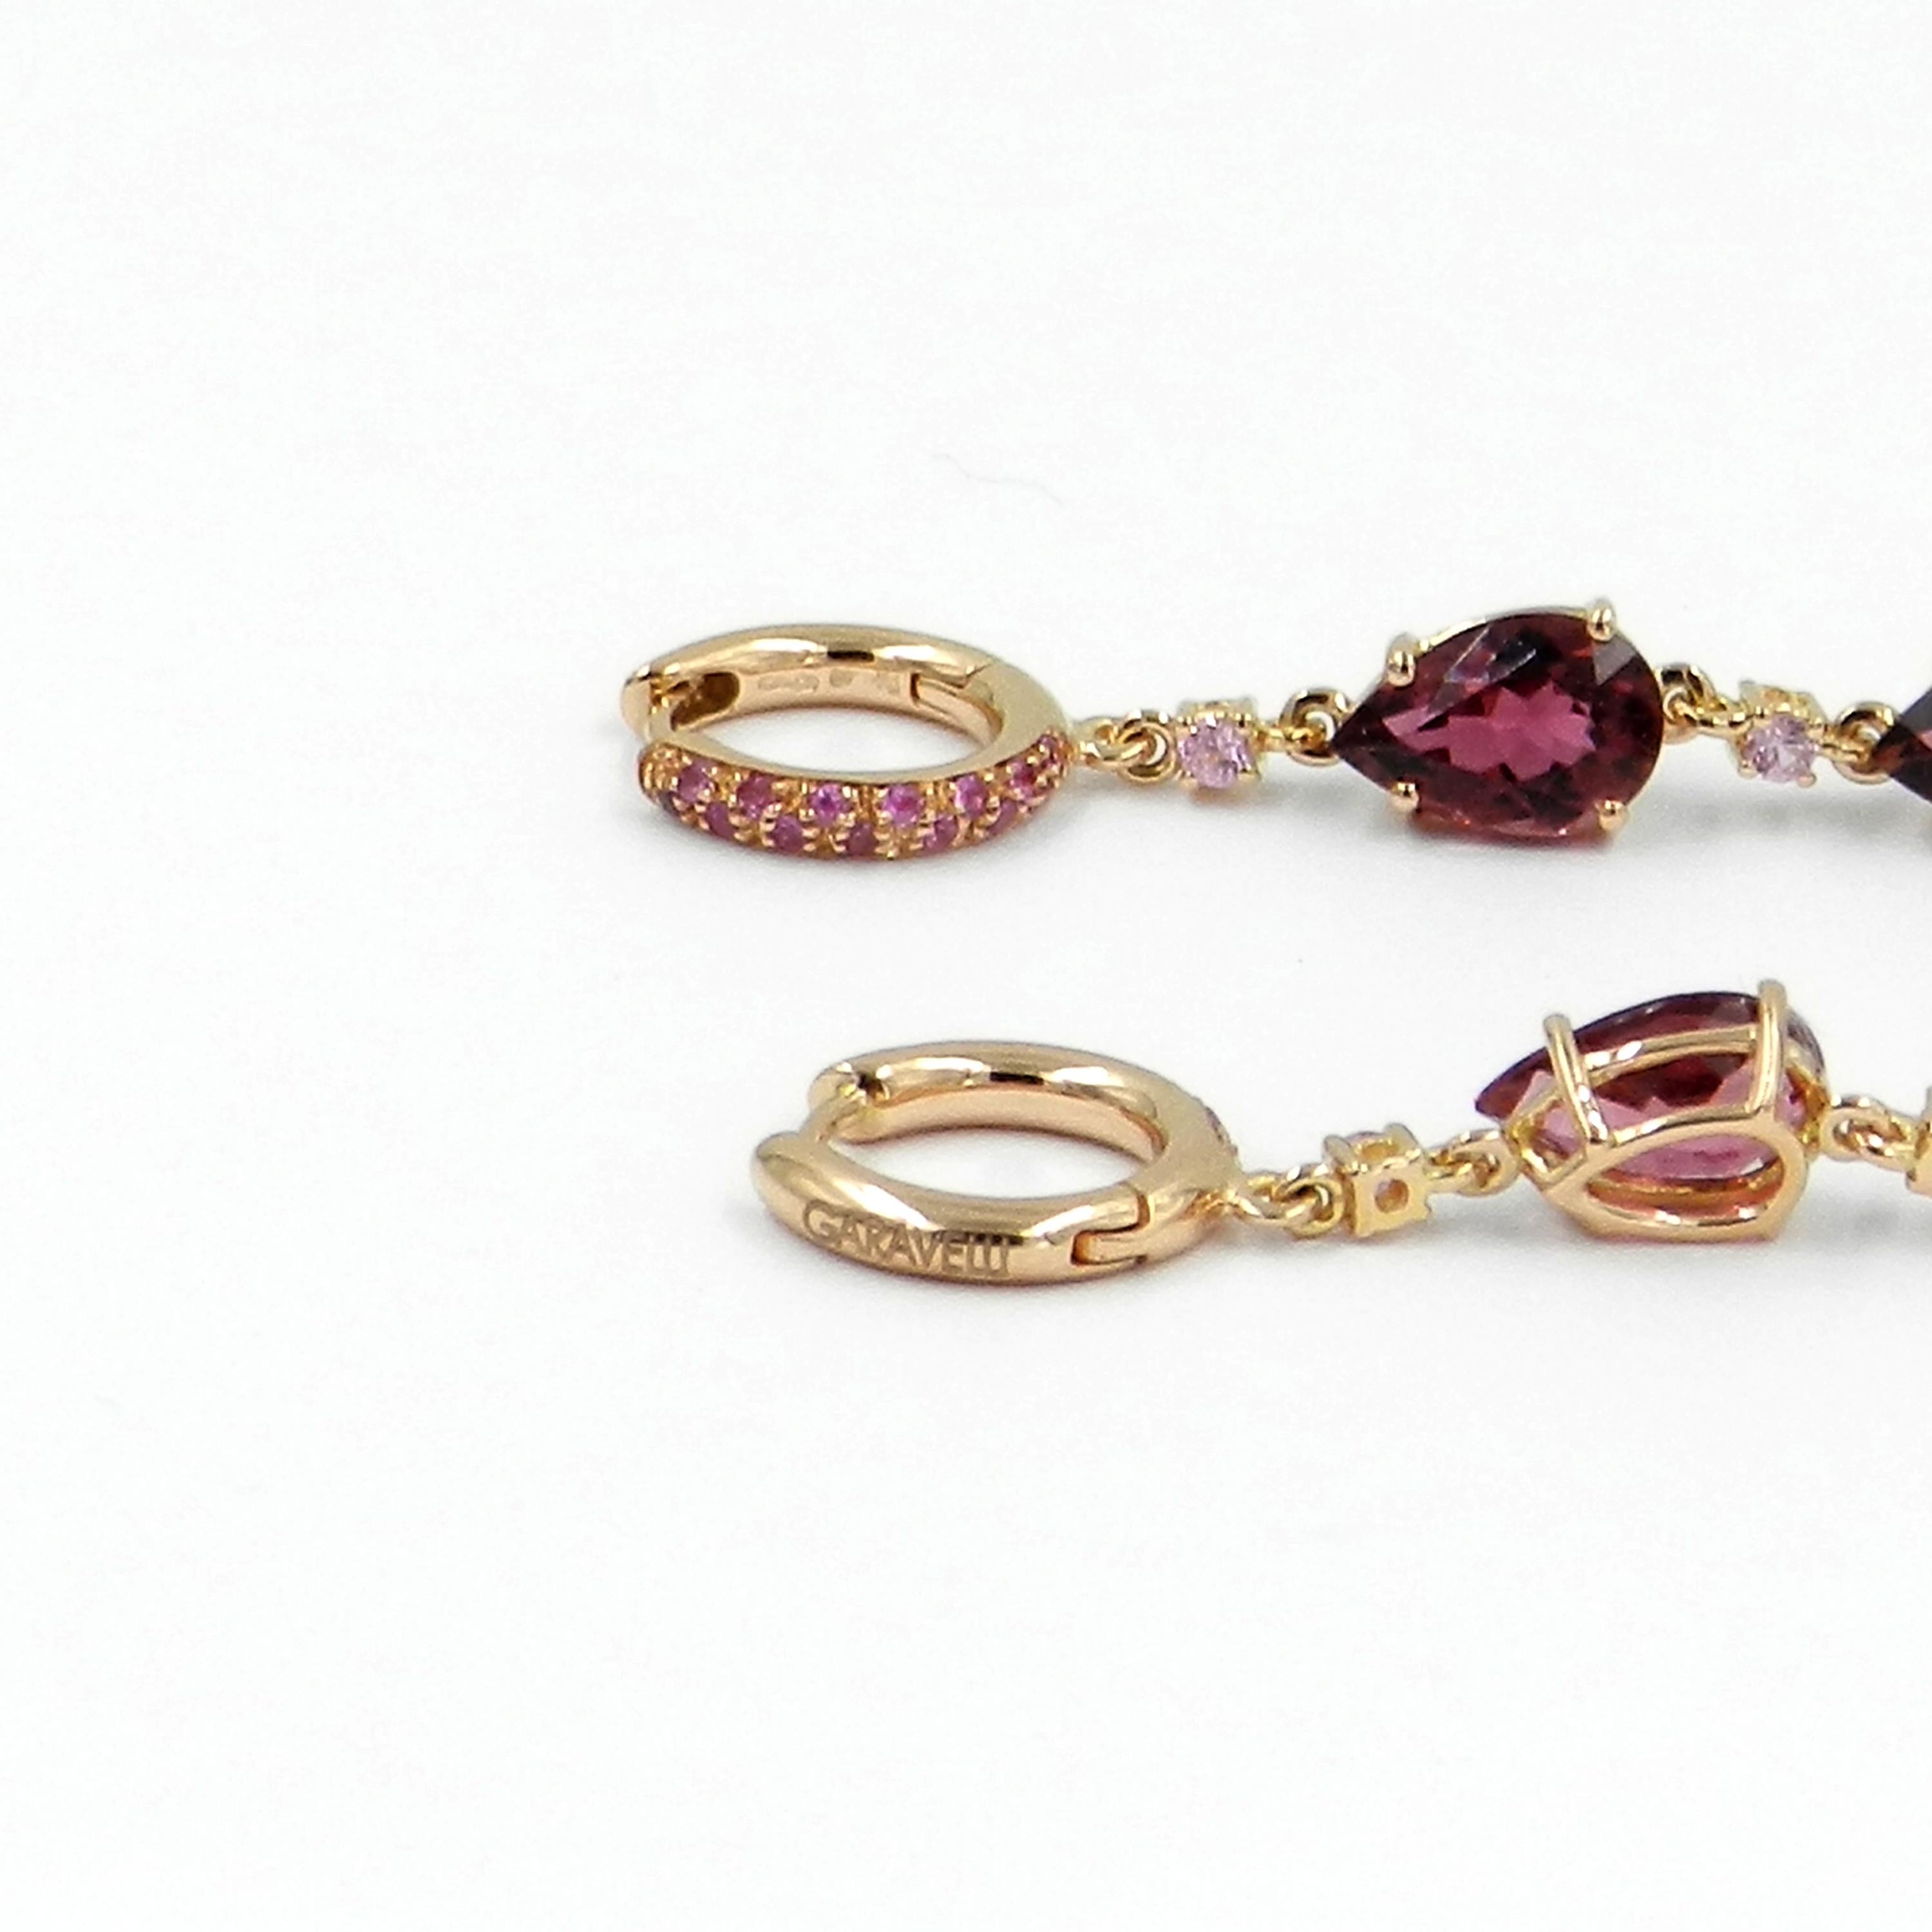 18KT Rose Gold PINK TOURMALINE and PINK SAPPHIRES LONG GARAVELLI EARRINGS 

Lenght mm.90 

GOLD gr : 8,75
PINK SAPPHIRES ct  : 0,64
NATURAL PINK TOURMALINE DROPS ct : 11,50